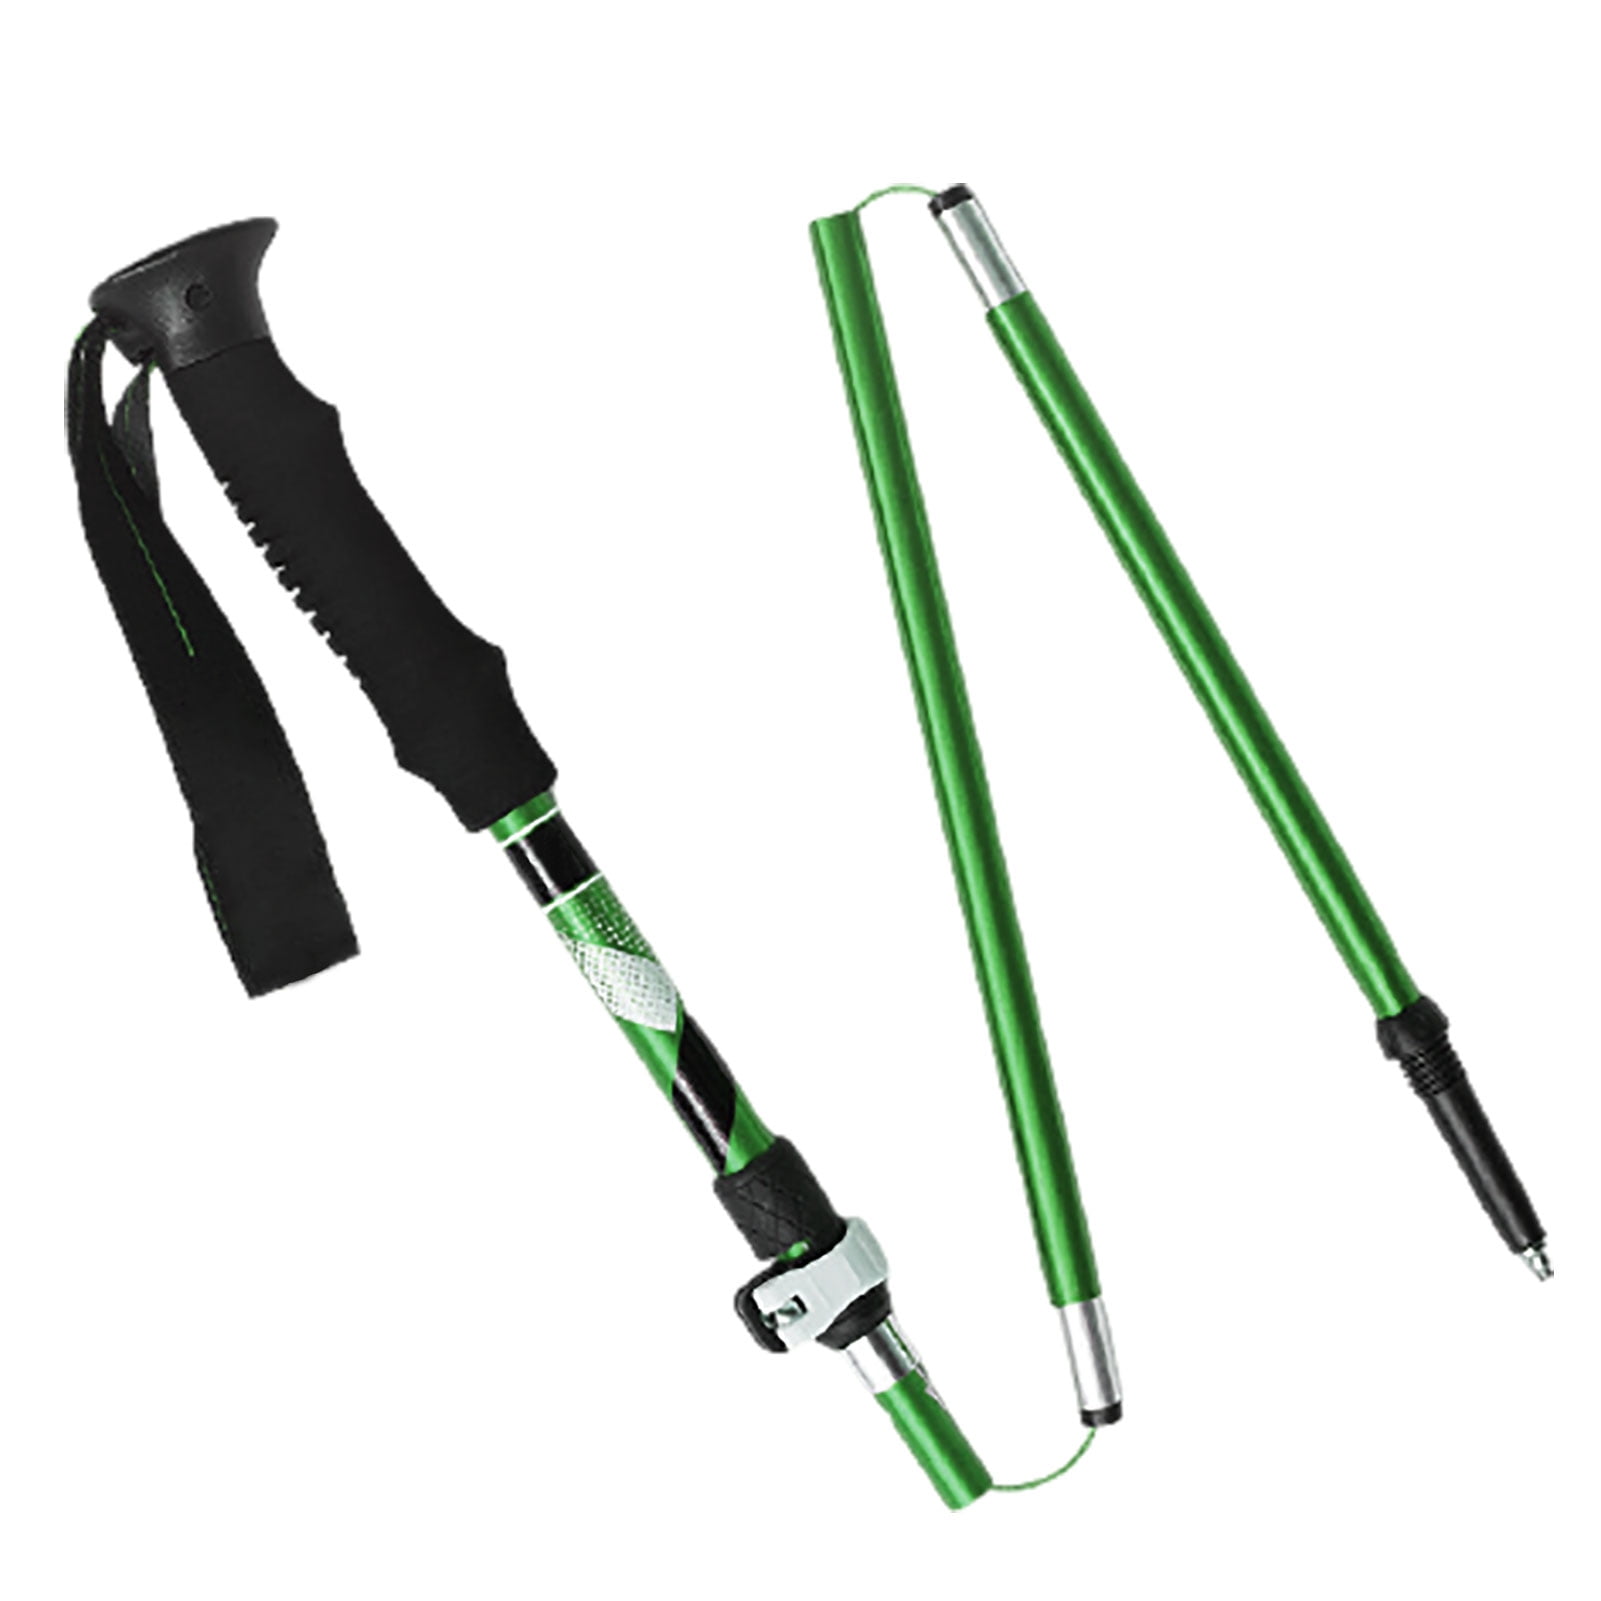 Innomoon Automatic Telescopic Hiking Stick Pocket Stick Tool, 21 inch 3 Sections Trekking Poles with Sleeves, Tail Ropes and Non-Slip Handle, adult